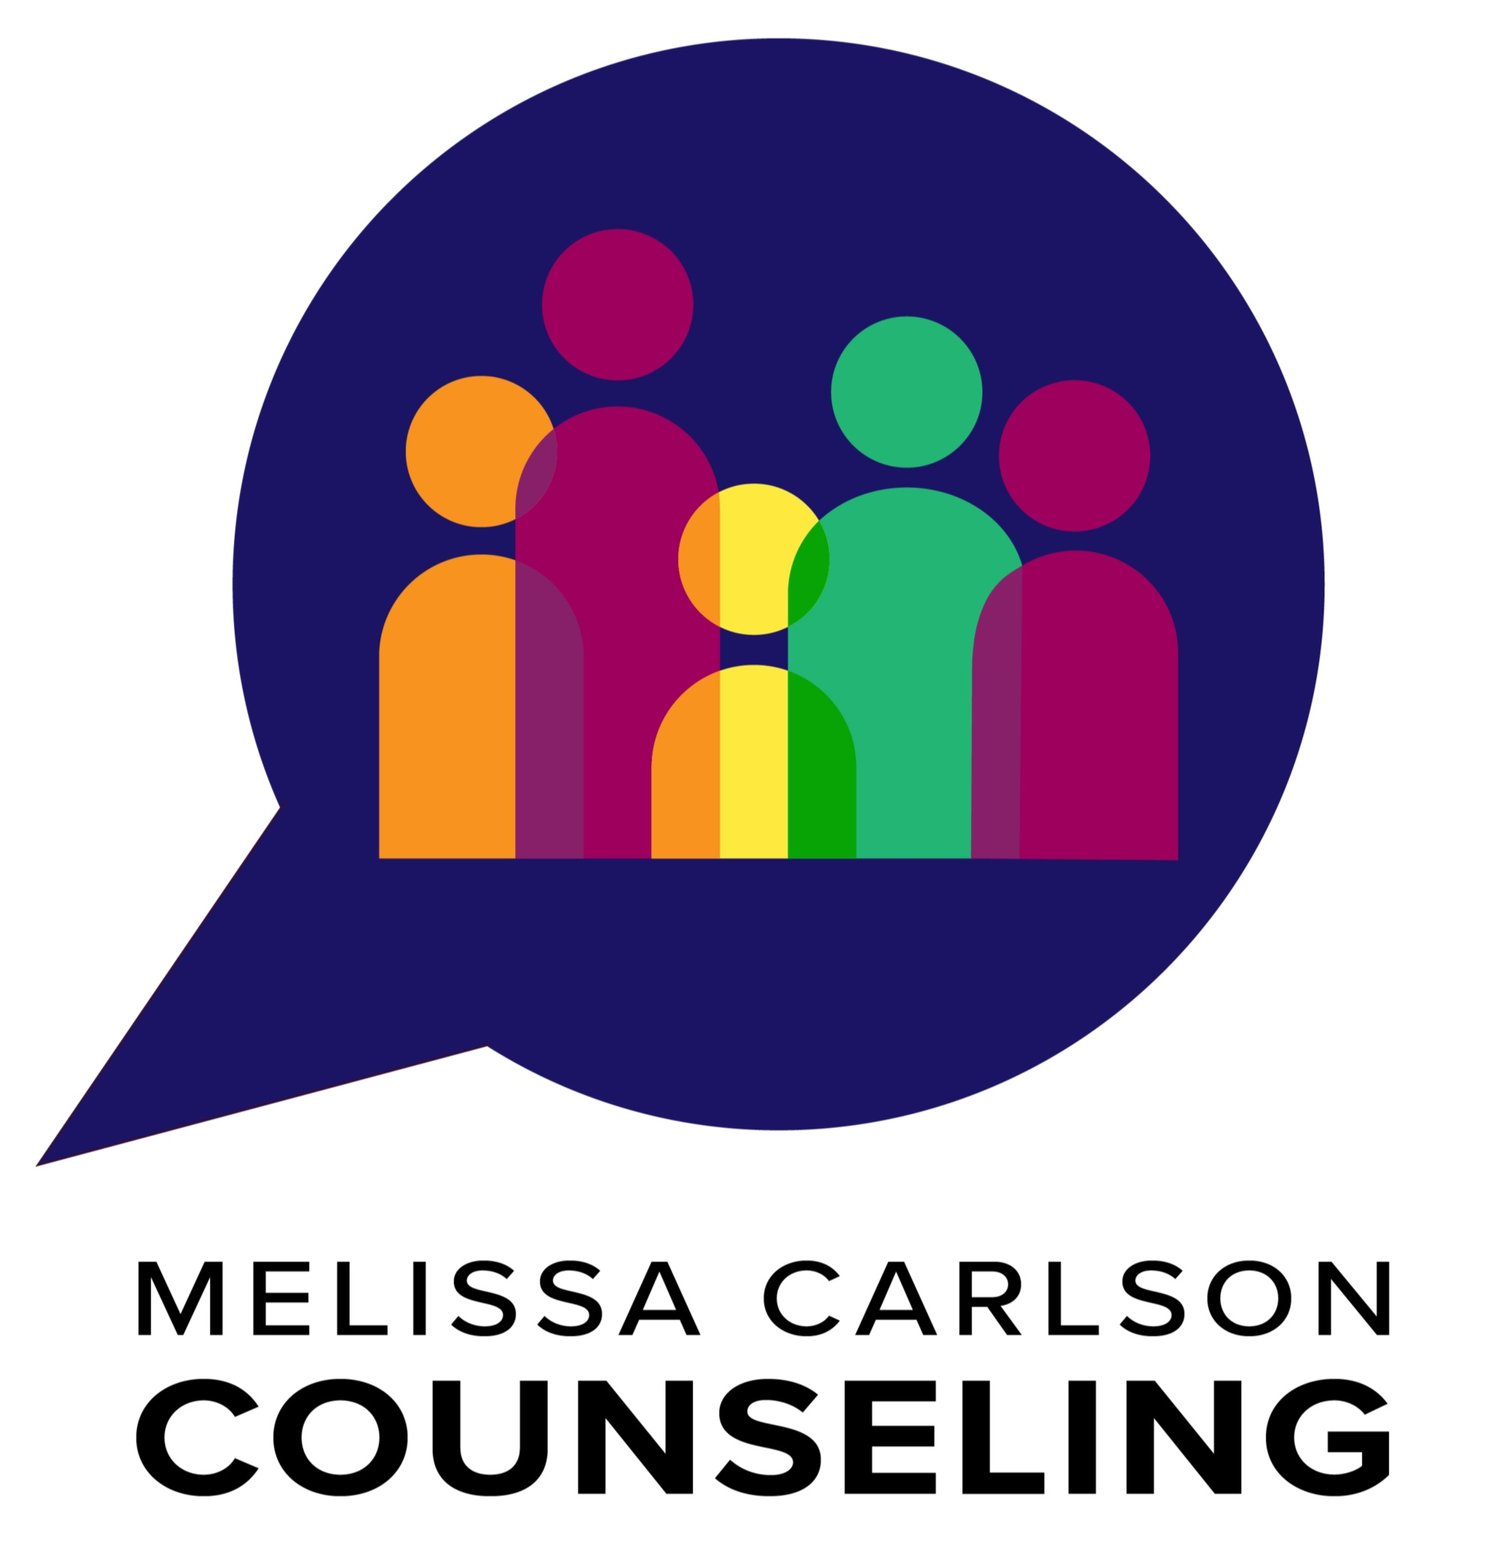 Melissa Carlson Counseling